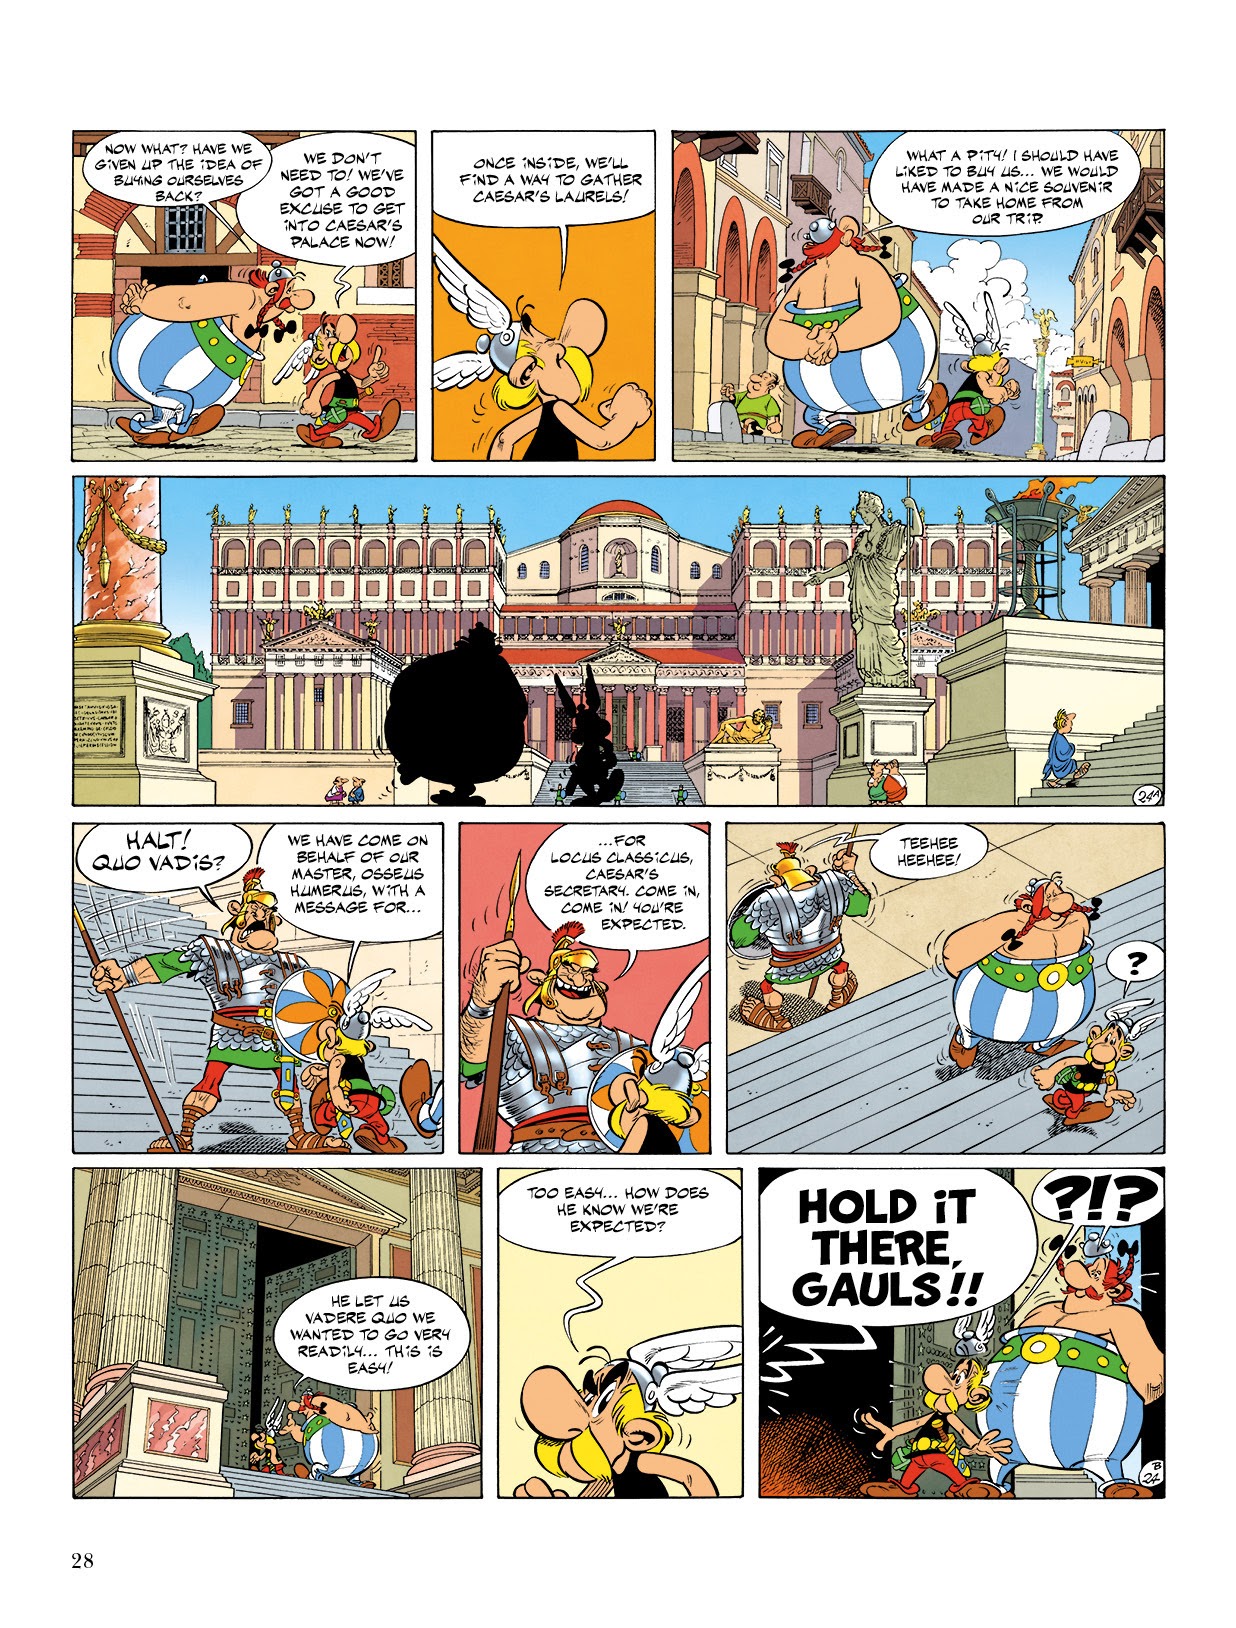 Read online Asterix comic -  Issue #18 - 29